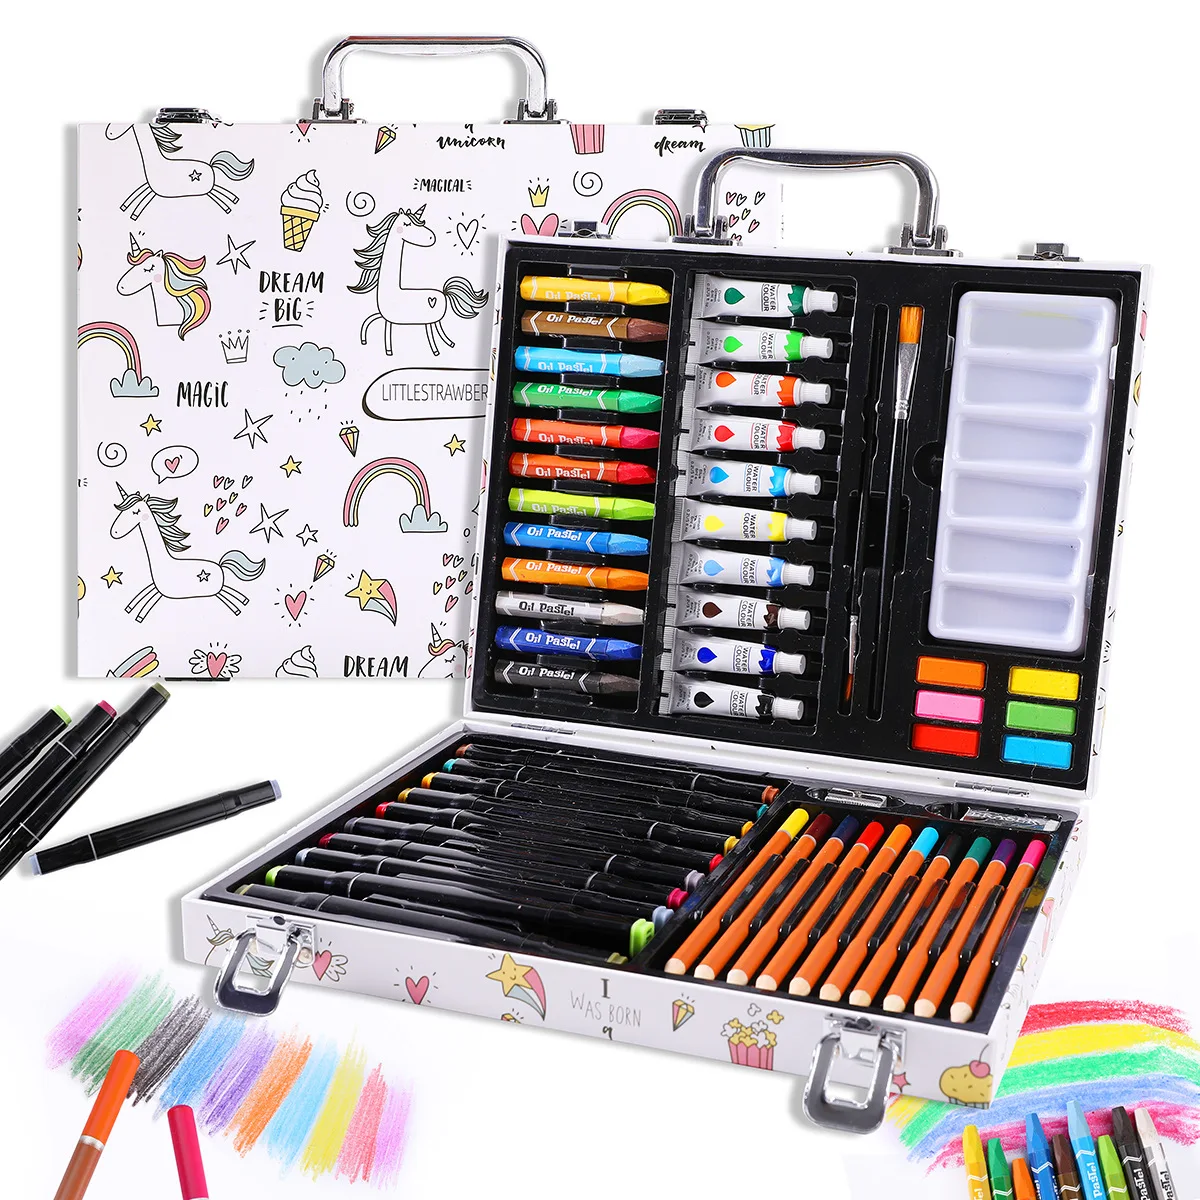 

53pcs Art Painting Set with Marker Crayon Colored Lead Pencils Acrylic Powder Brush Set Art Painting Children's Day Gift Box